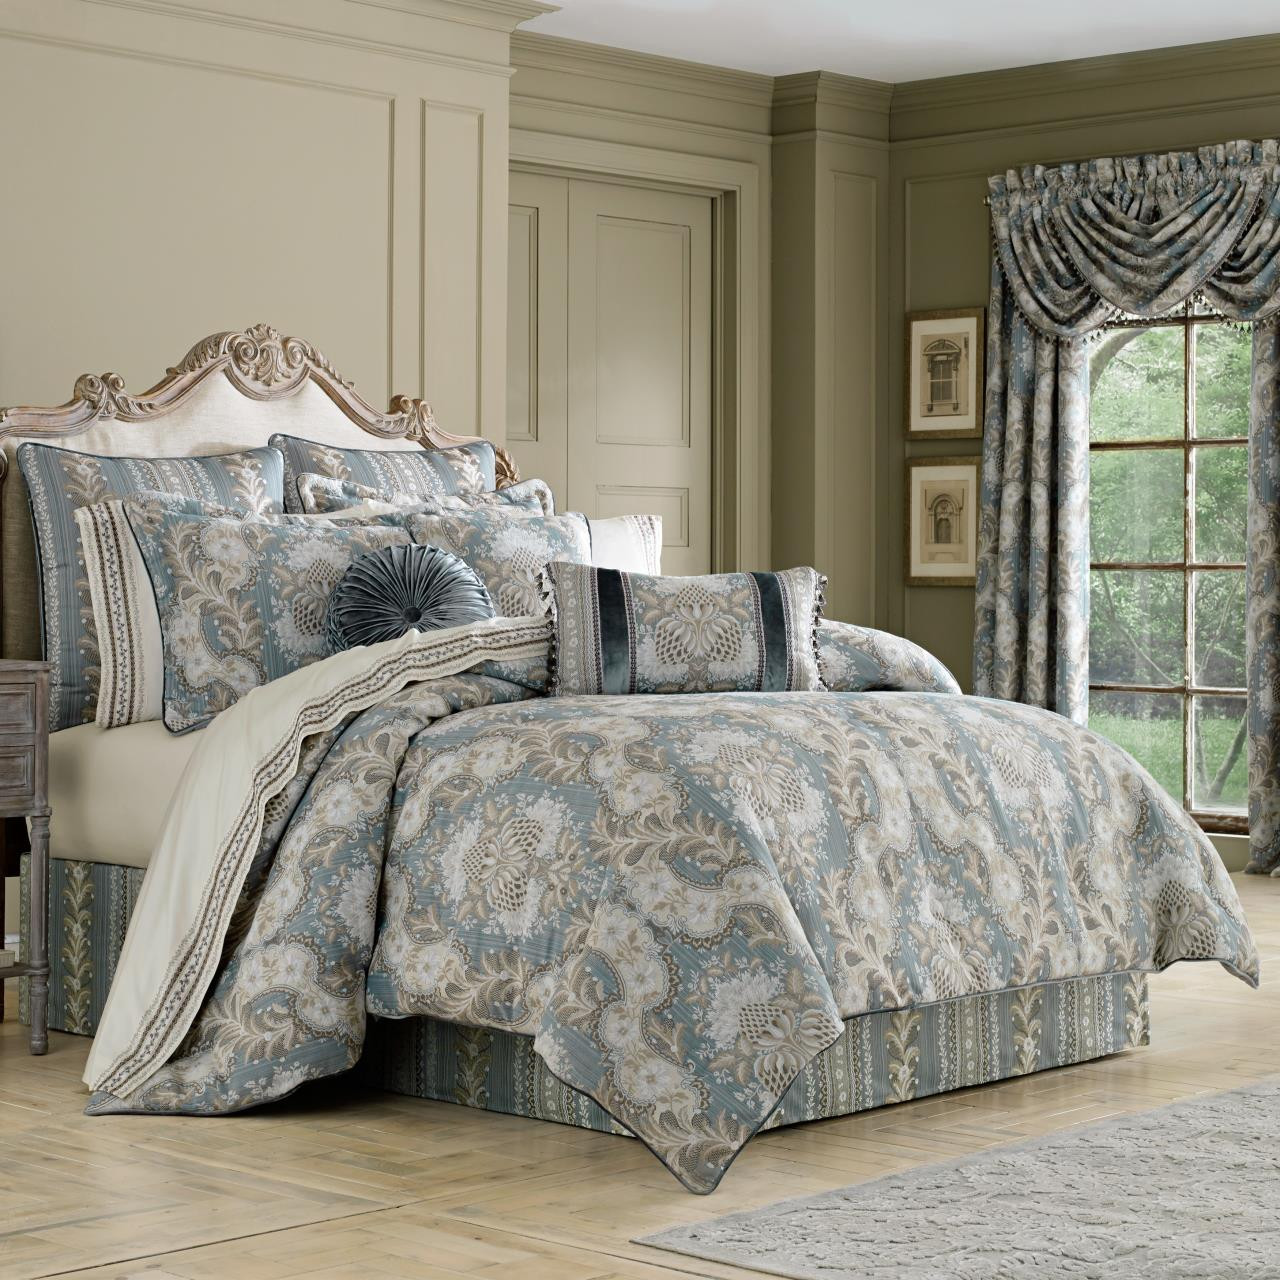 Crystal Palace Bedding Collection -